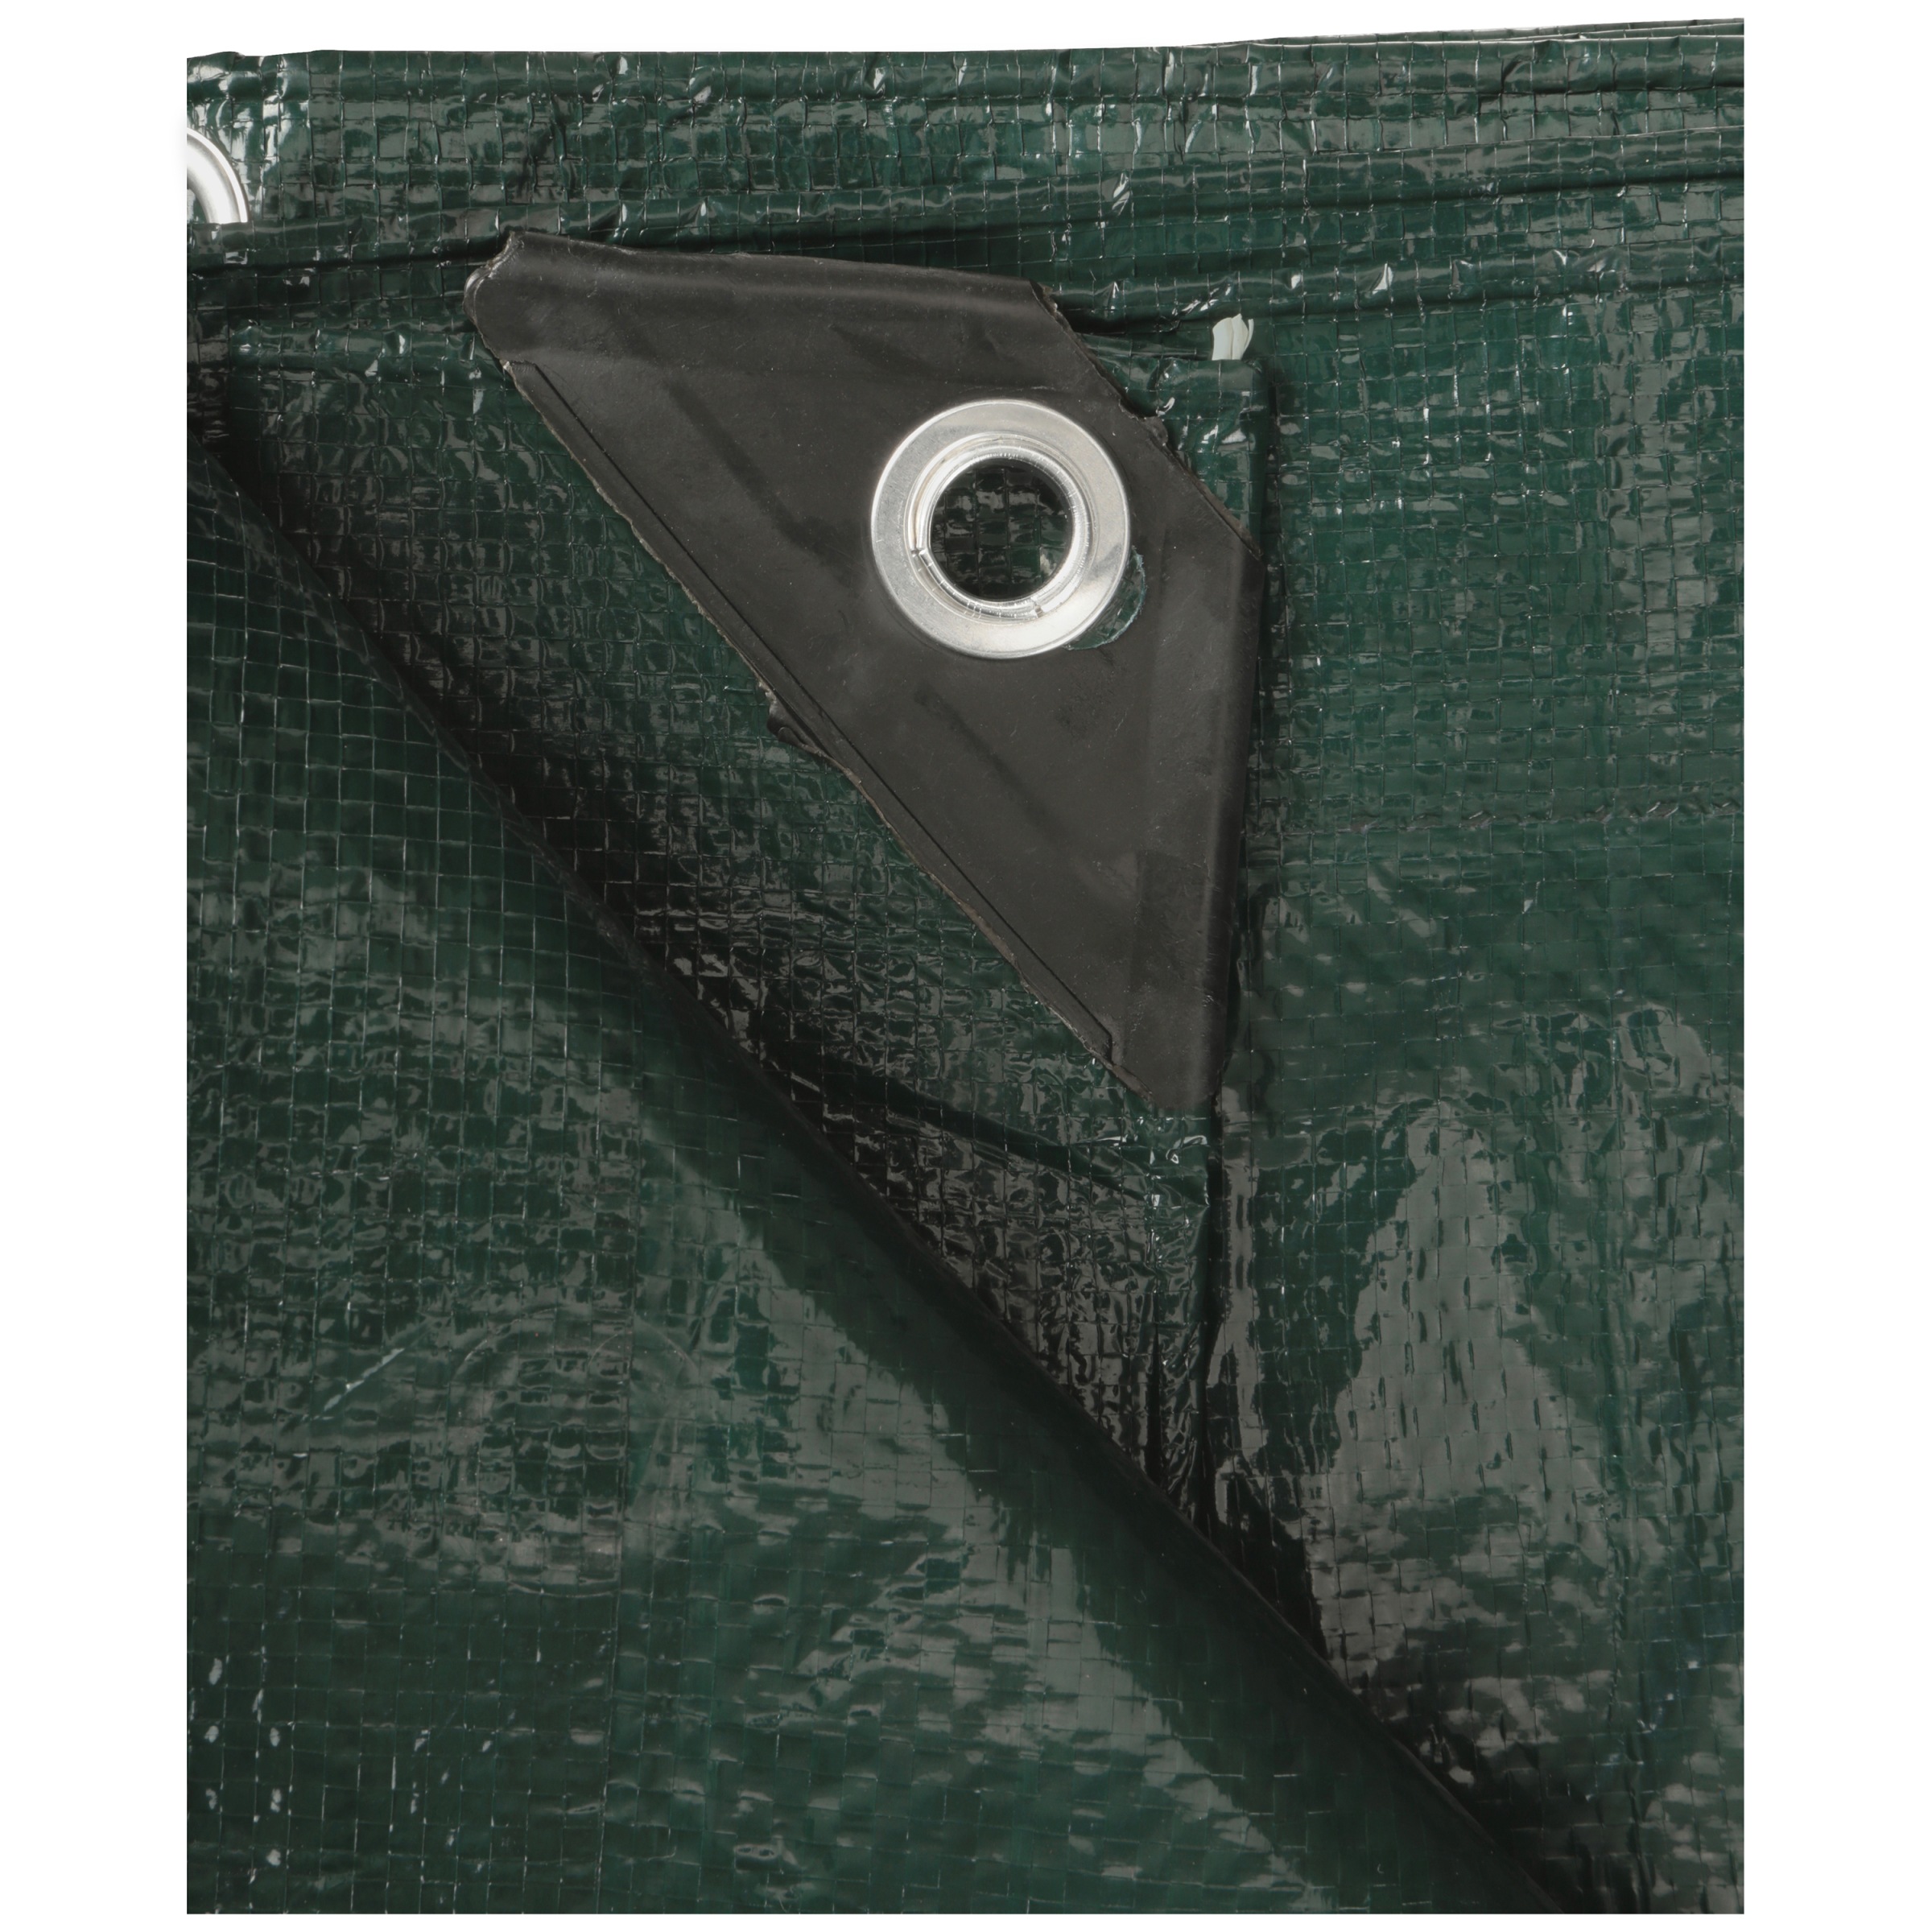 Stansport Rip Stop Tarp - 5' x 7' - Green - PDQ - image 4 of 4